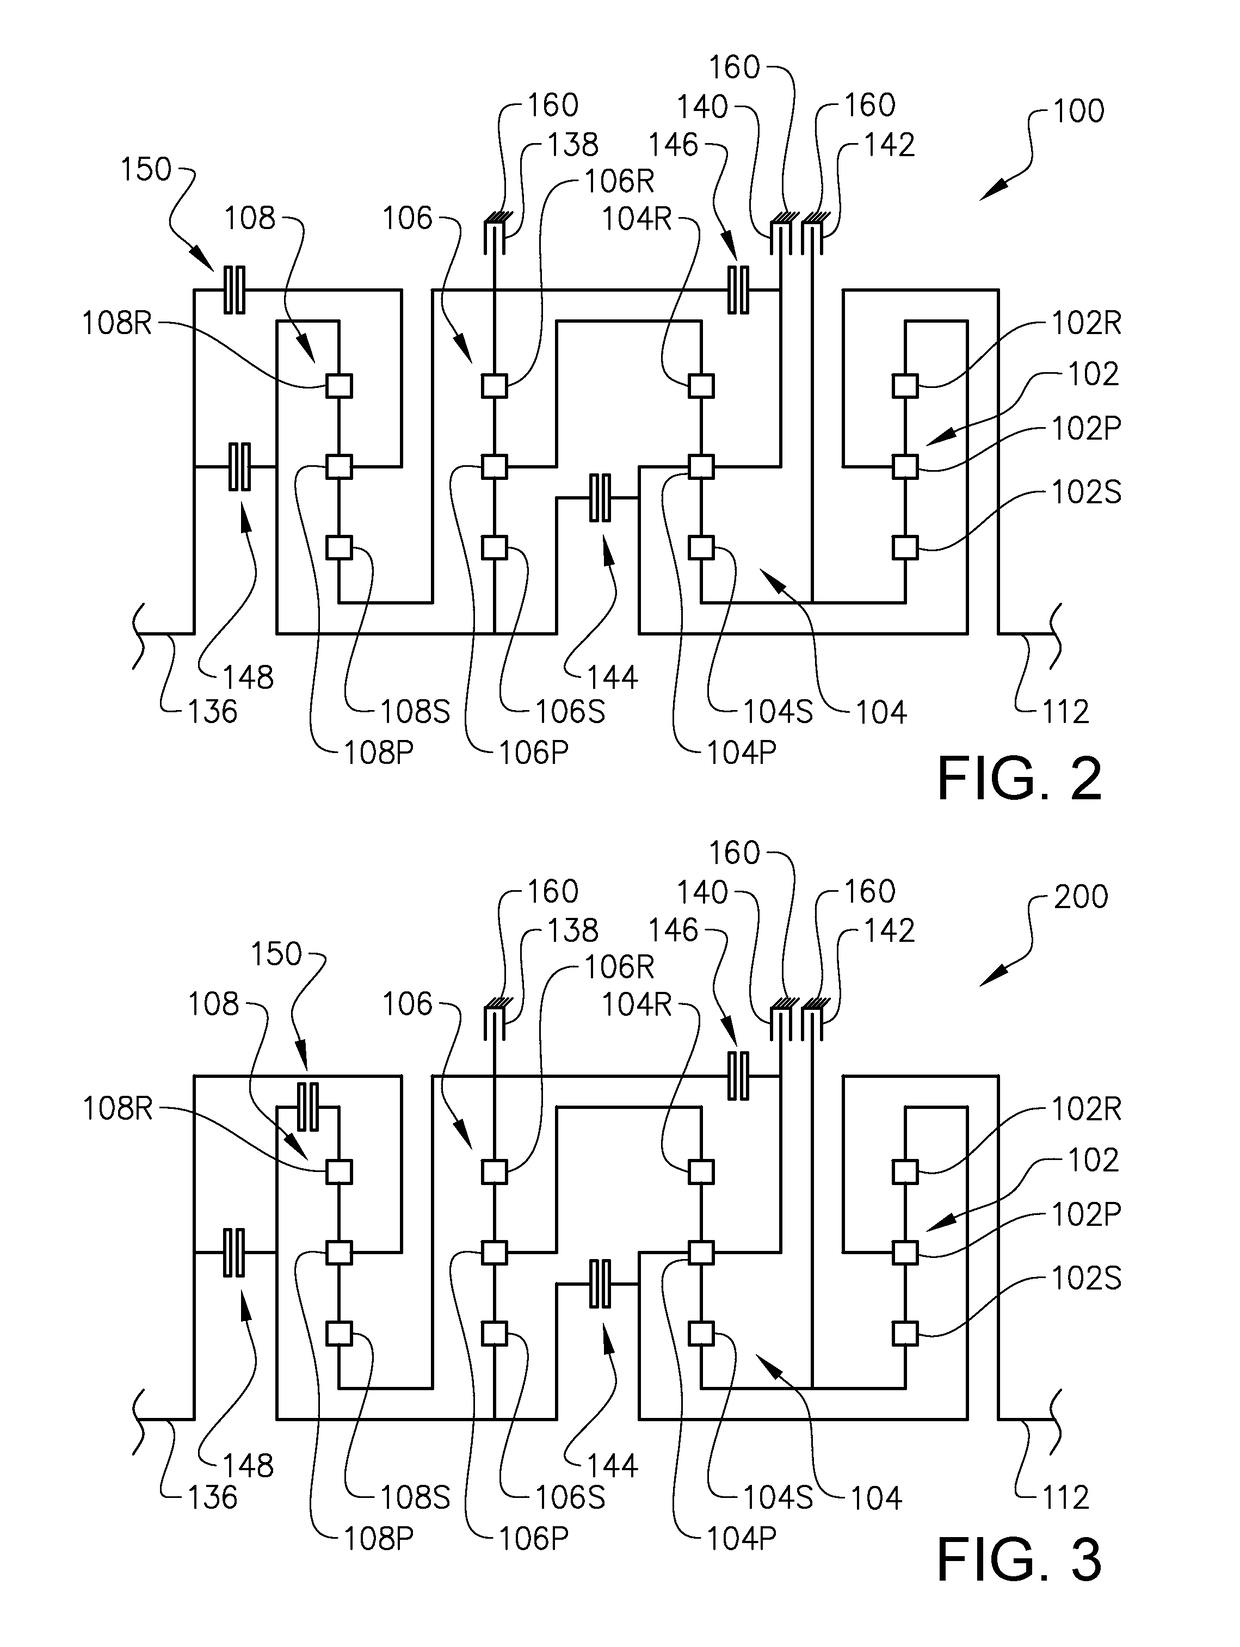 A method for controlling a gear shift in a transmission arrangement